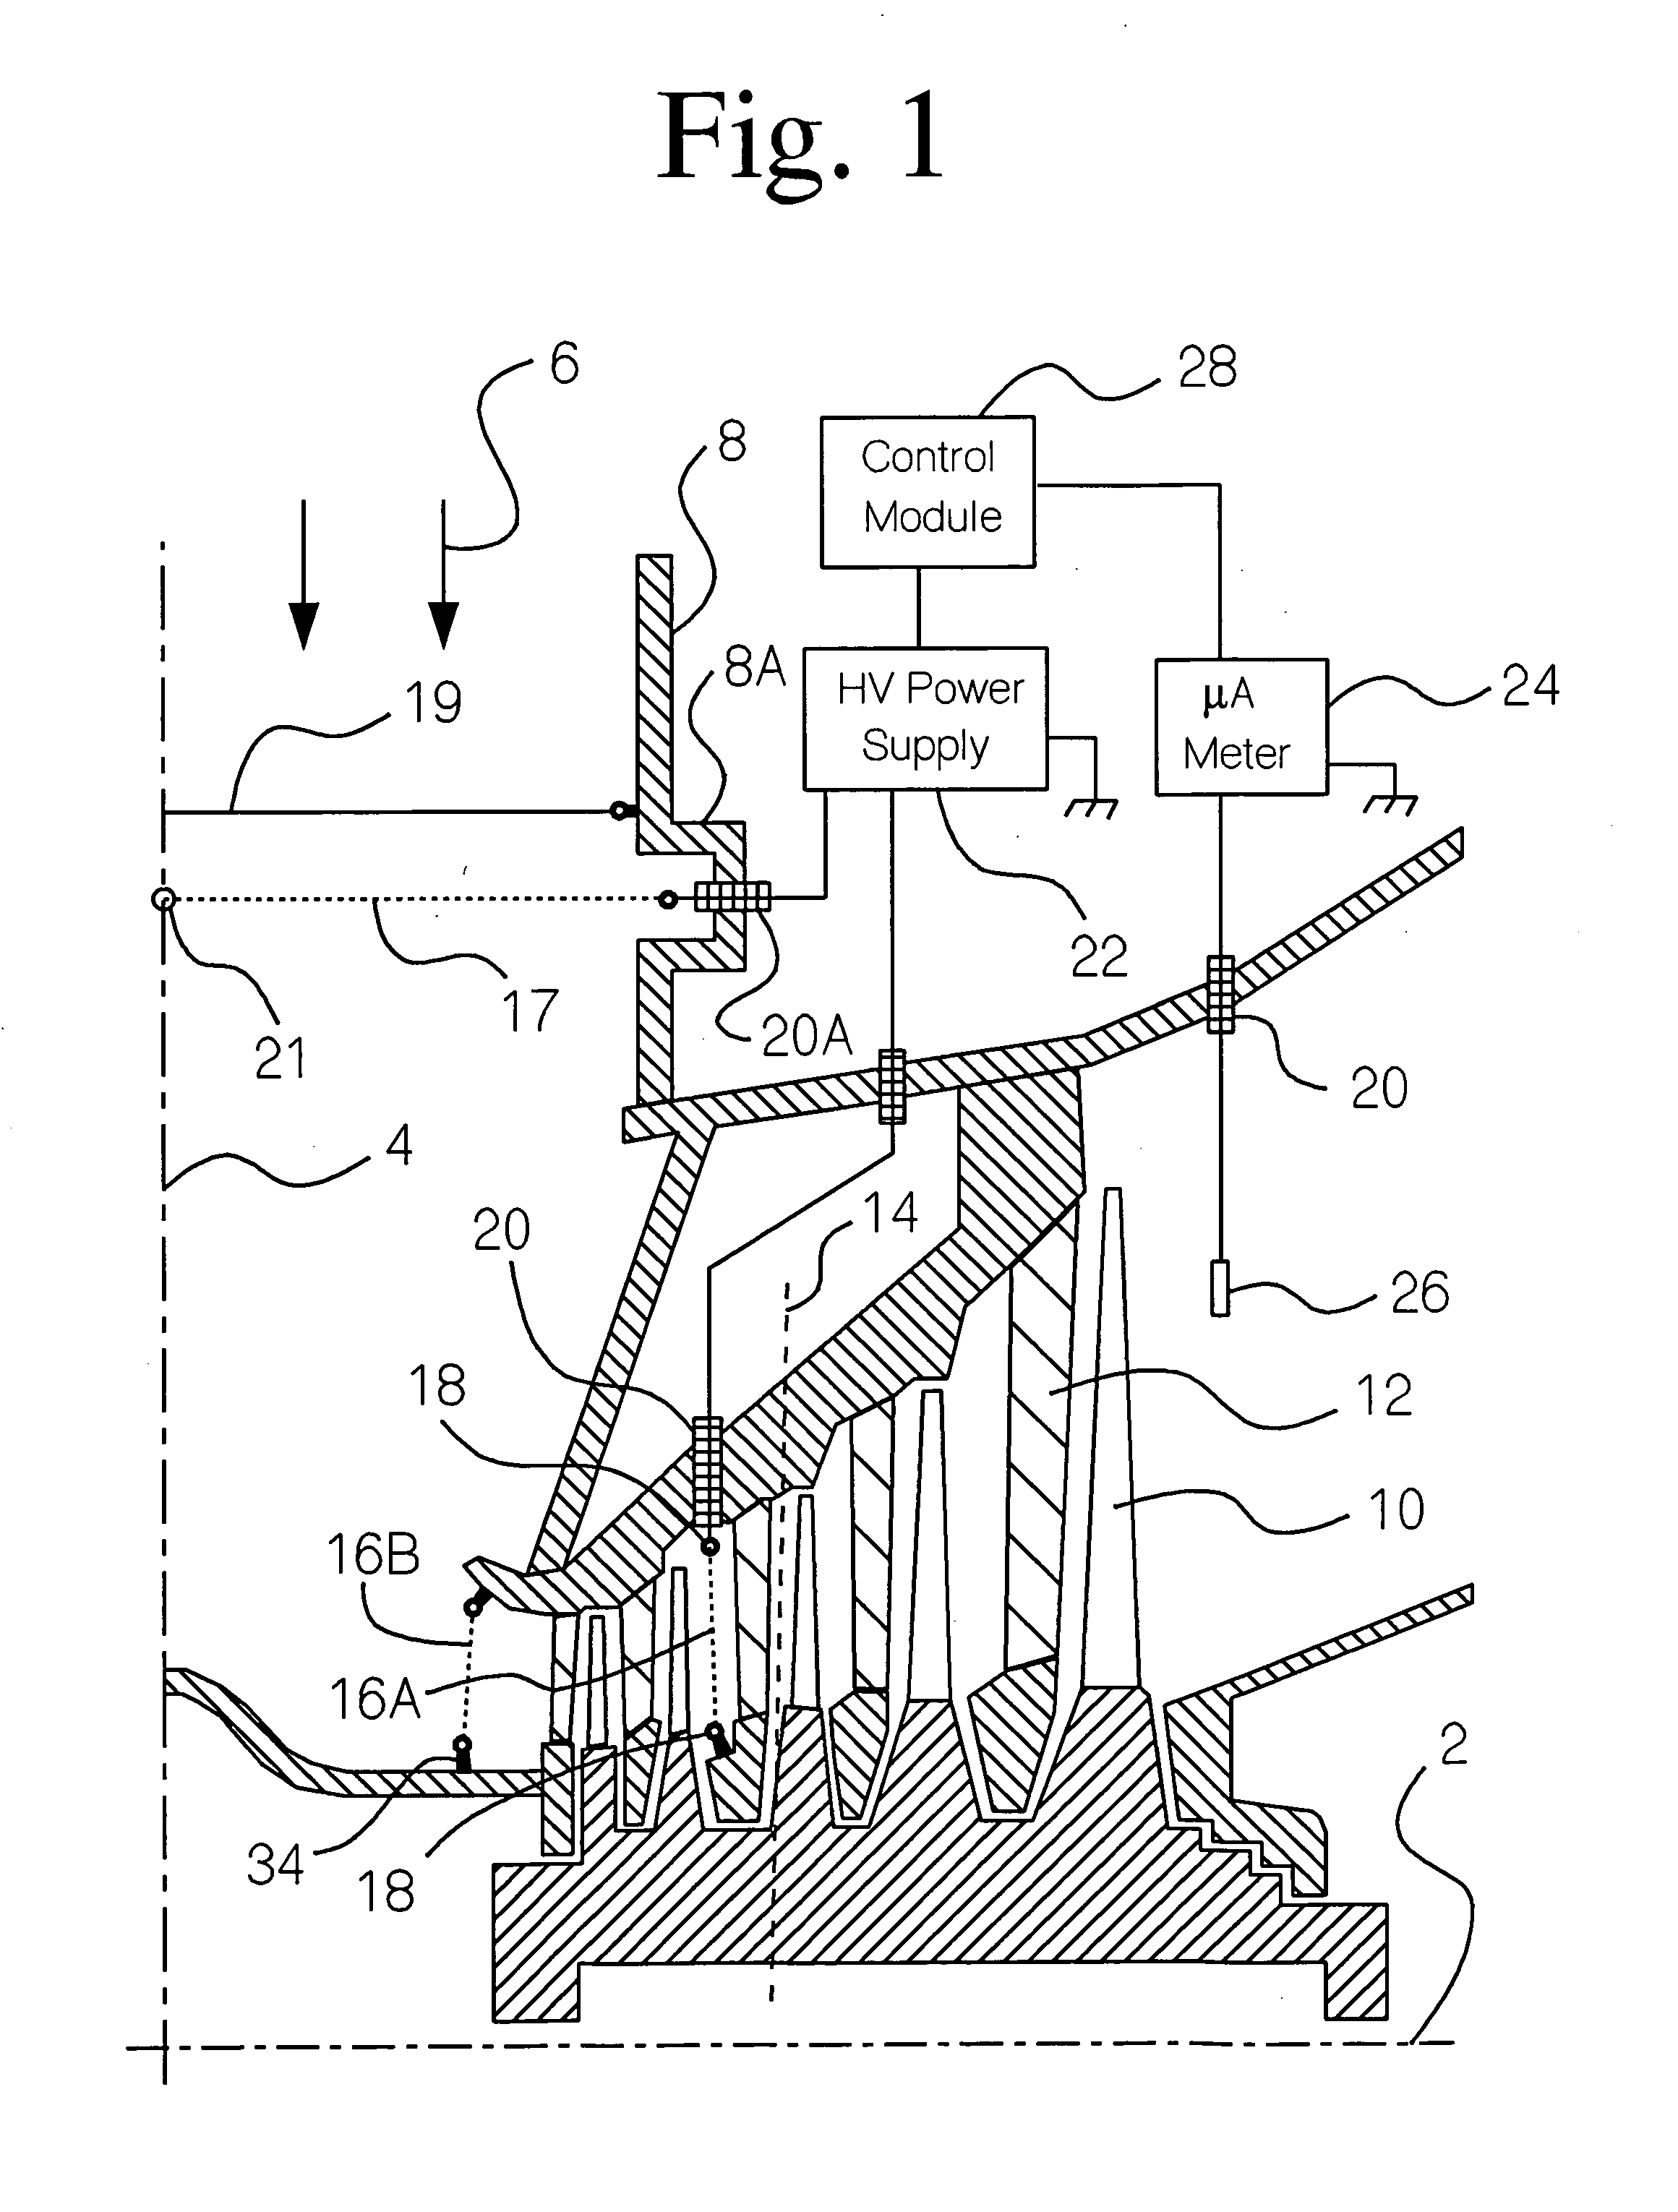 Electrostatic method and device to increase power output and decrease erosion in steam turbines